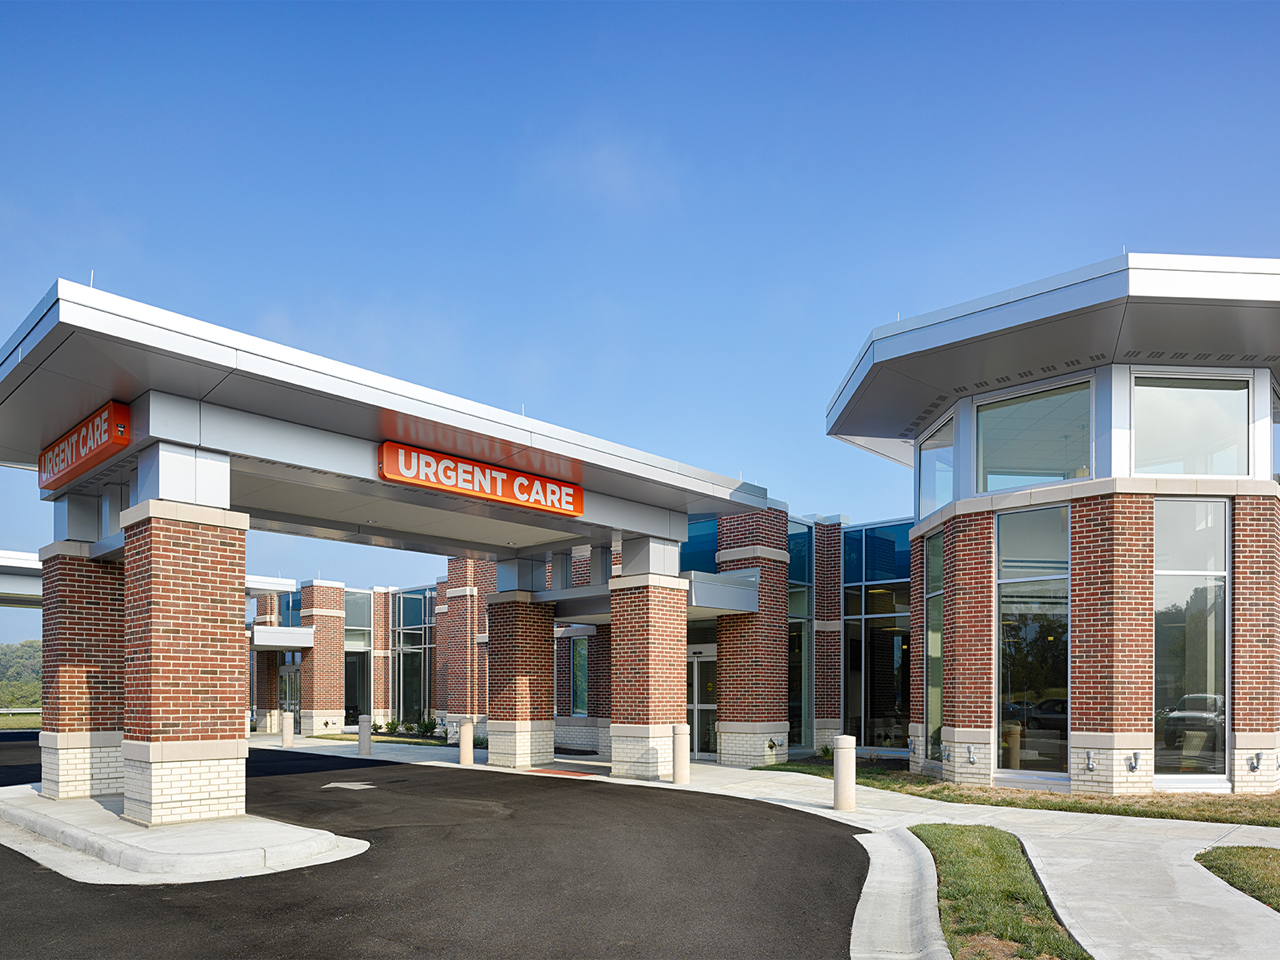 1400 grand urgent care and mob fort thomasjpg